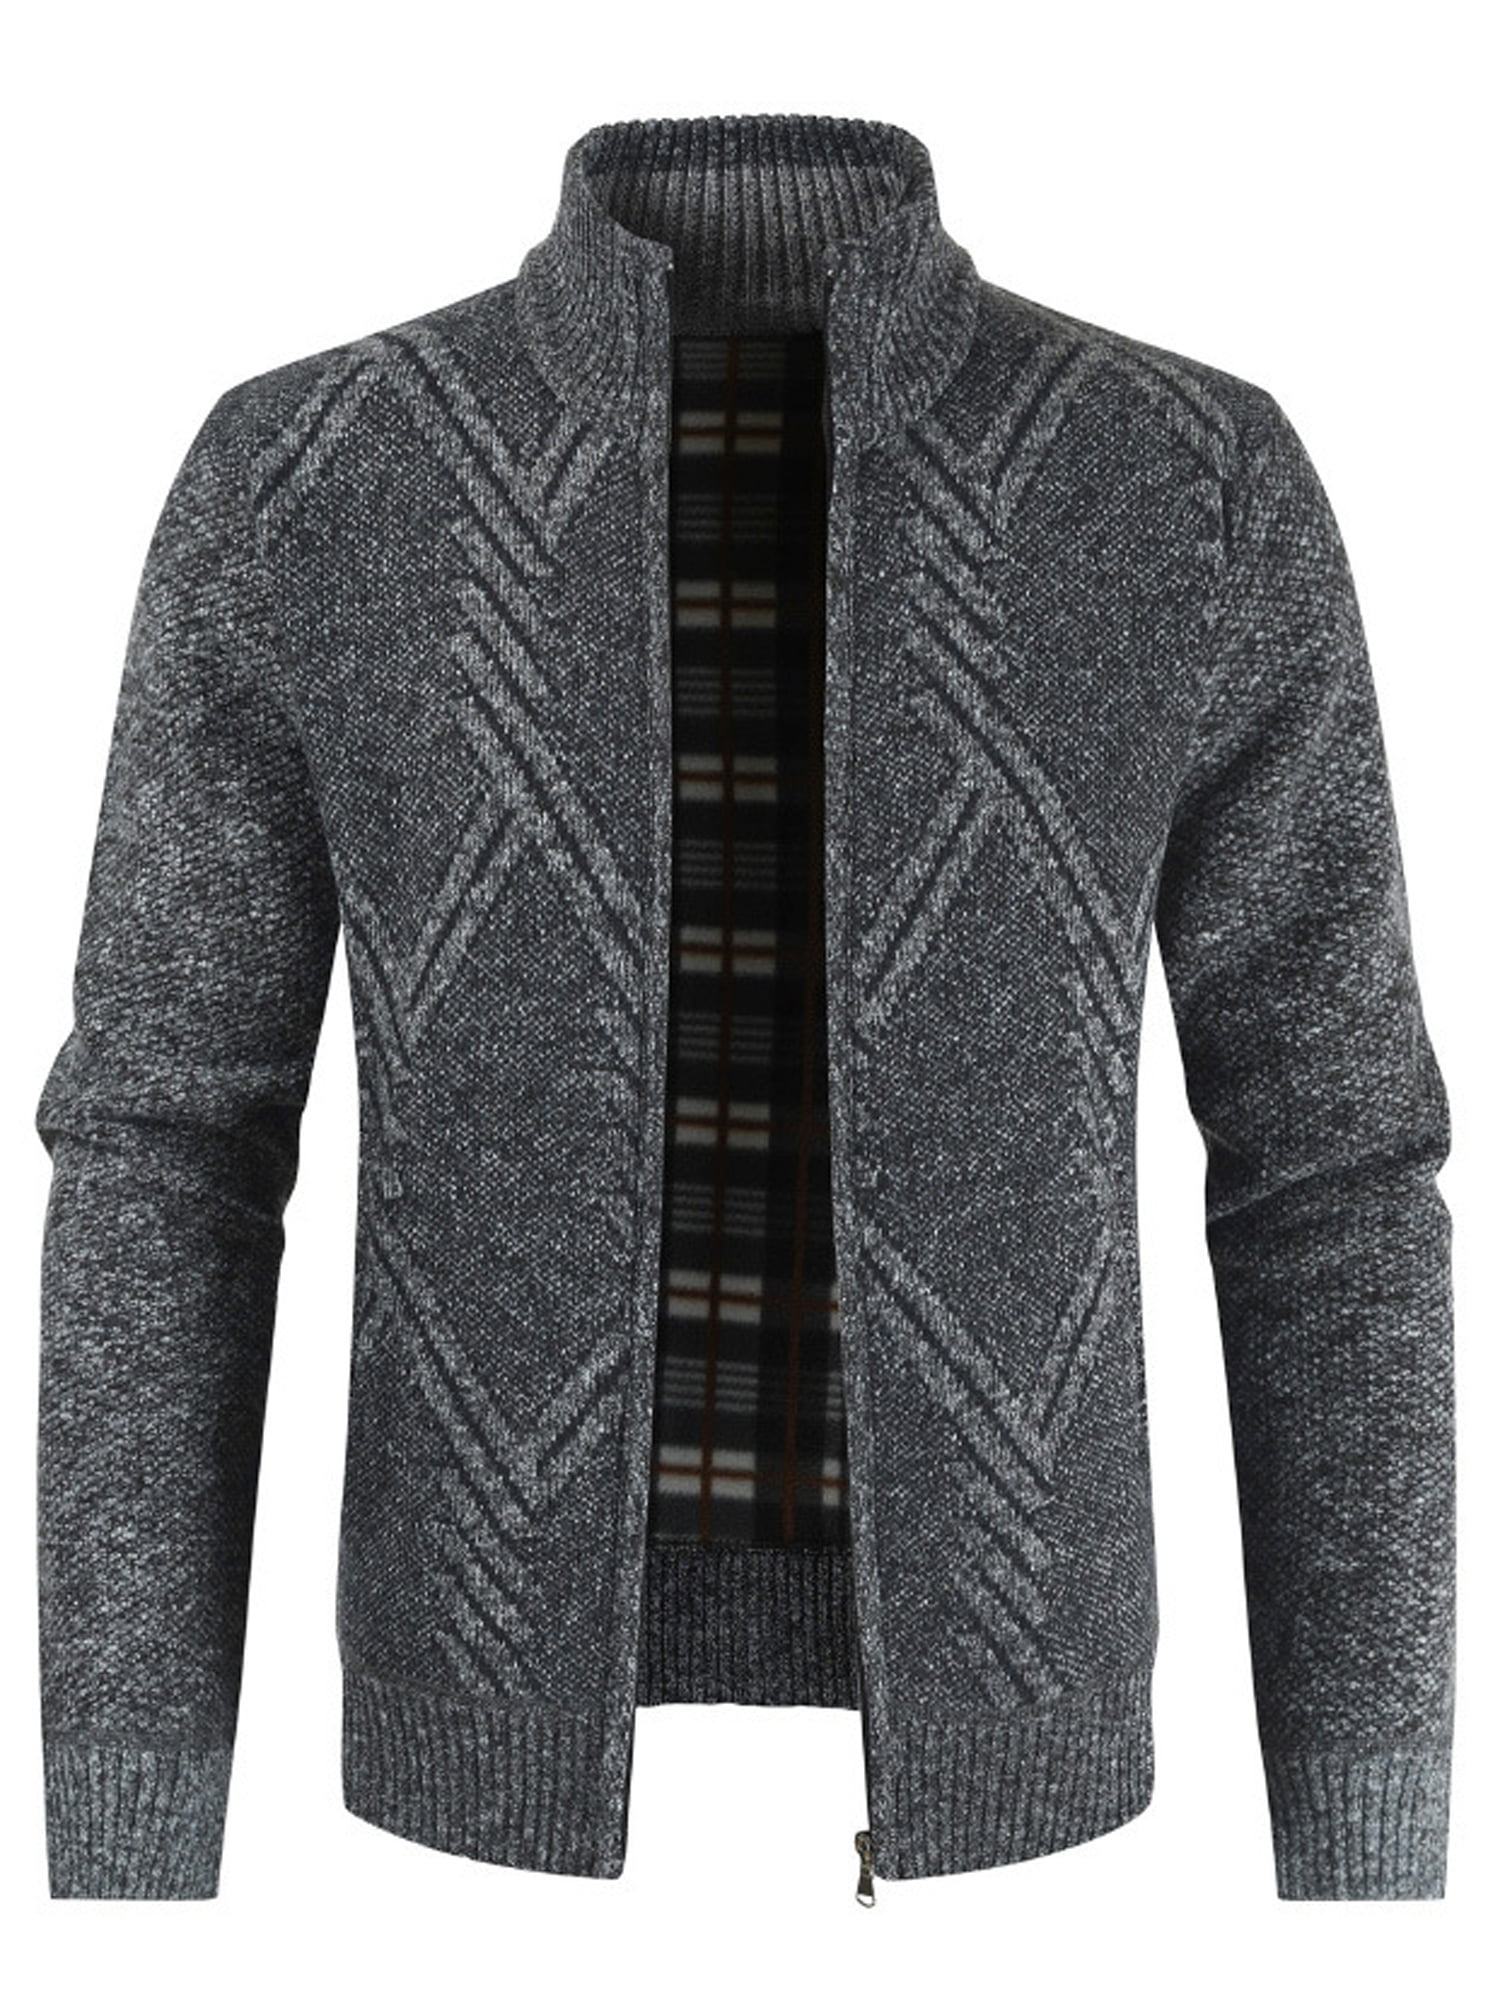 Mens Winter Knitted Zip Up Sweaters Cardigan Warm Casual Coat Jacket ...